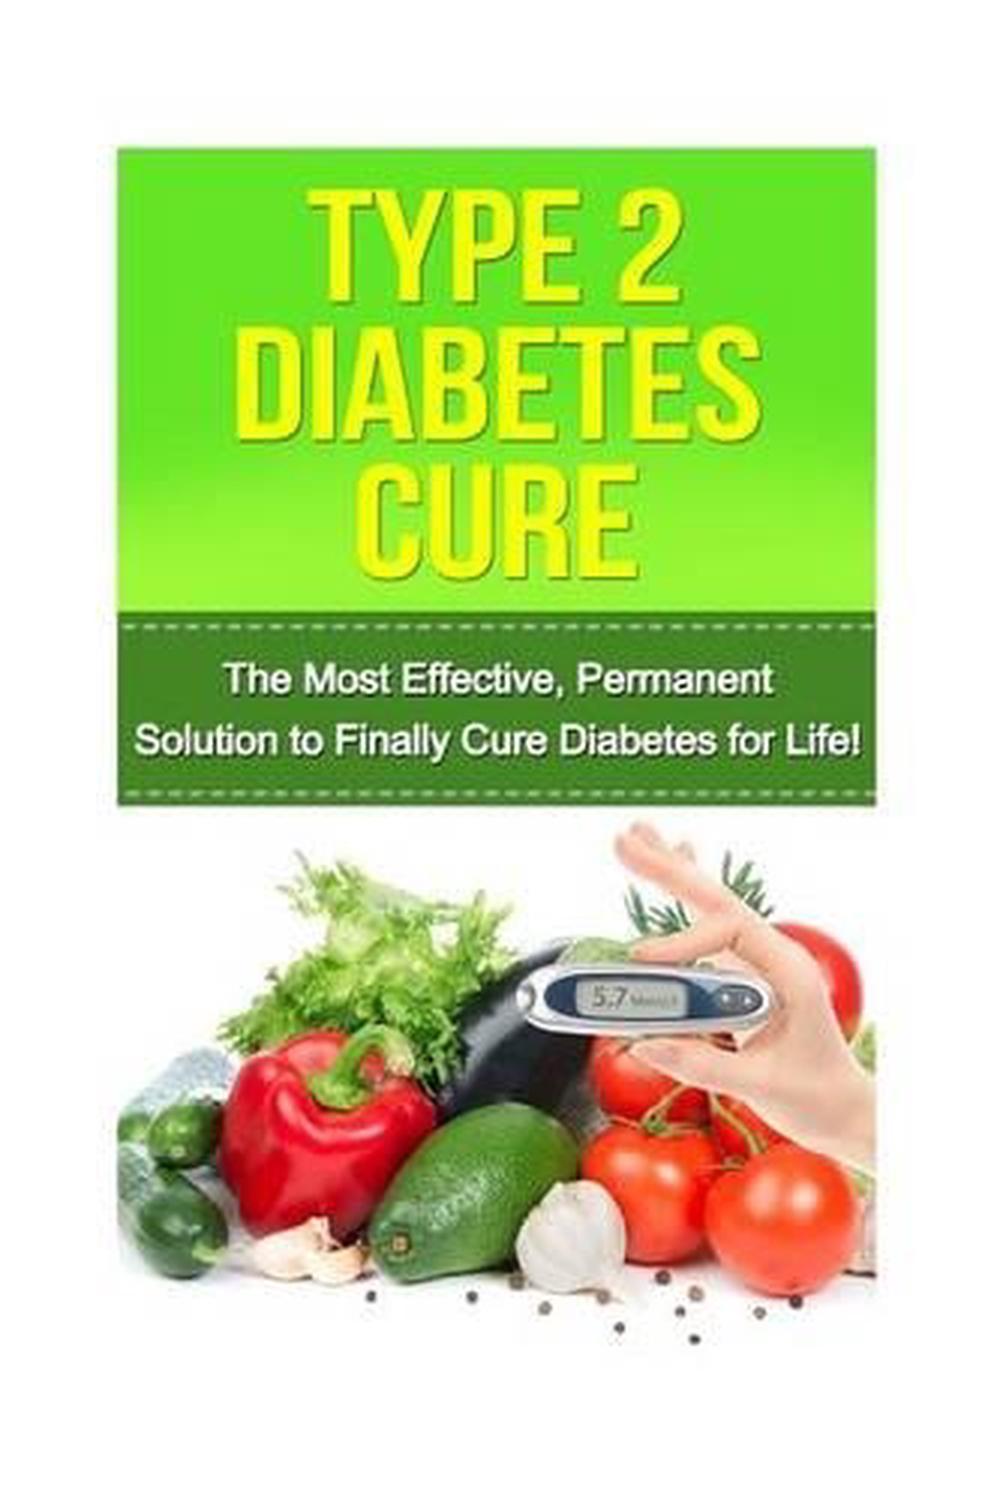 Type 2 Diabetes Cure The Most Effective, Permanent Solution to Finally